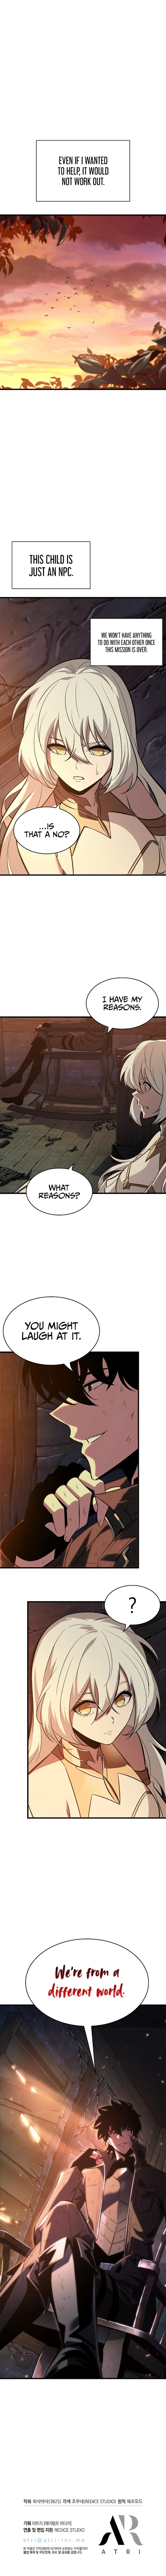 Pick Me Up - Chapter 51 Page 10